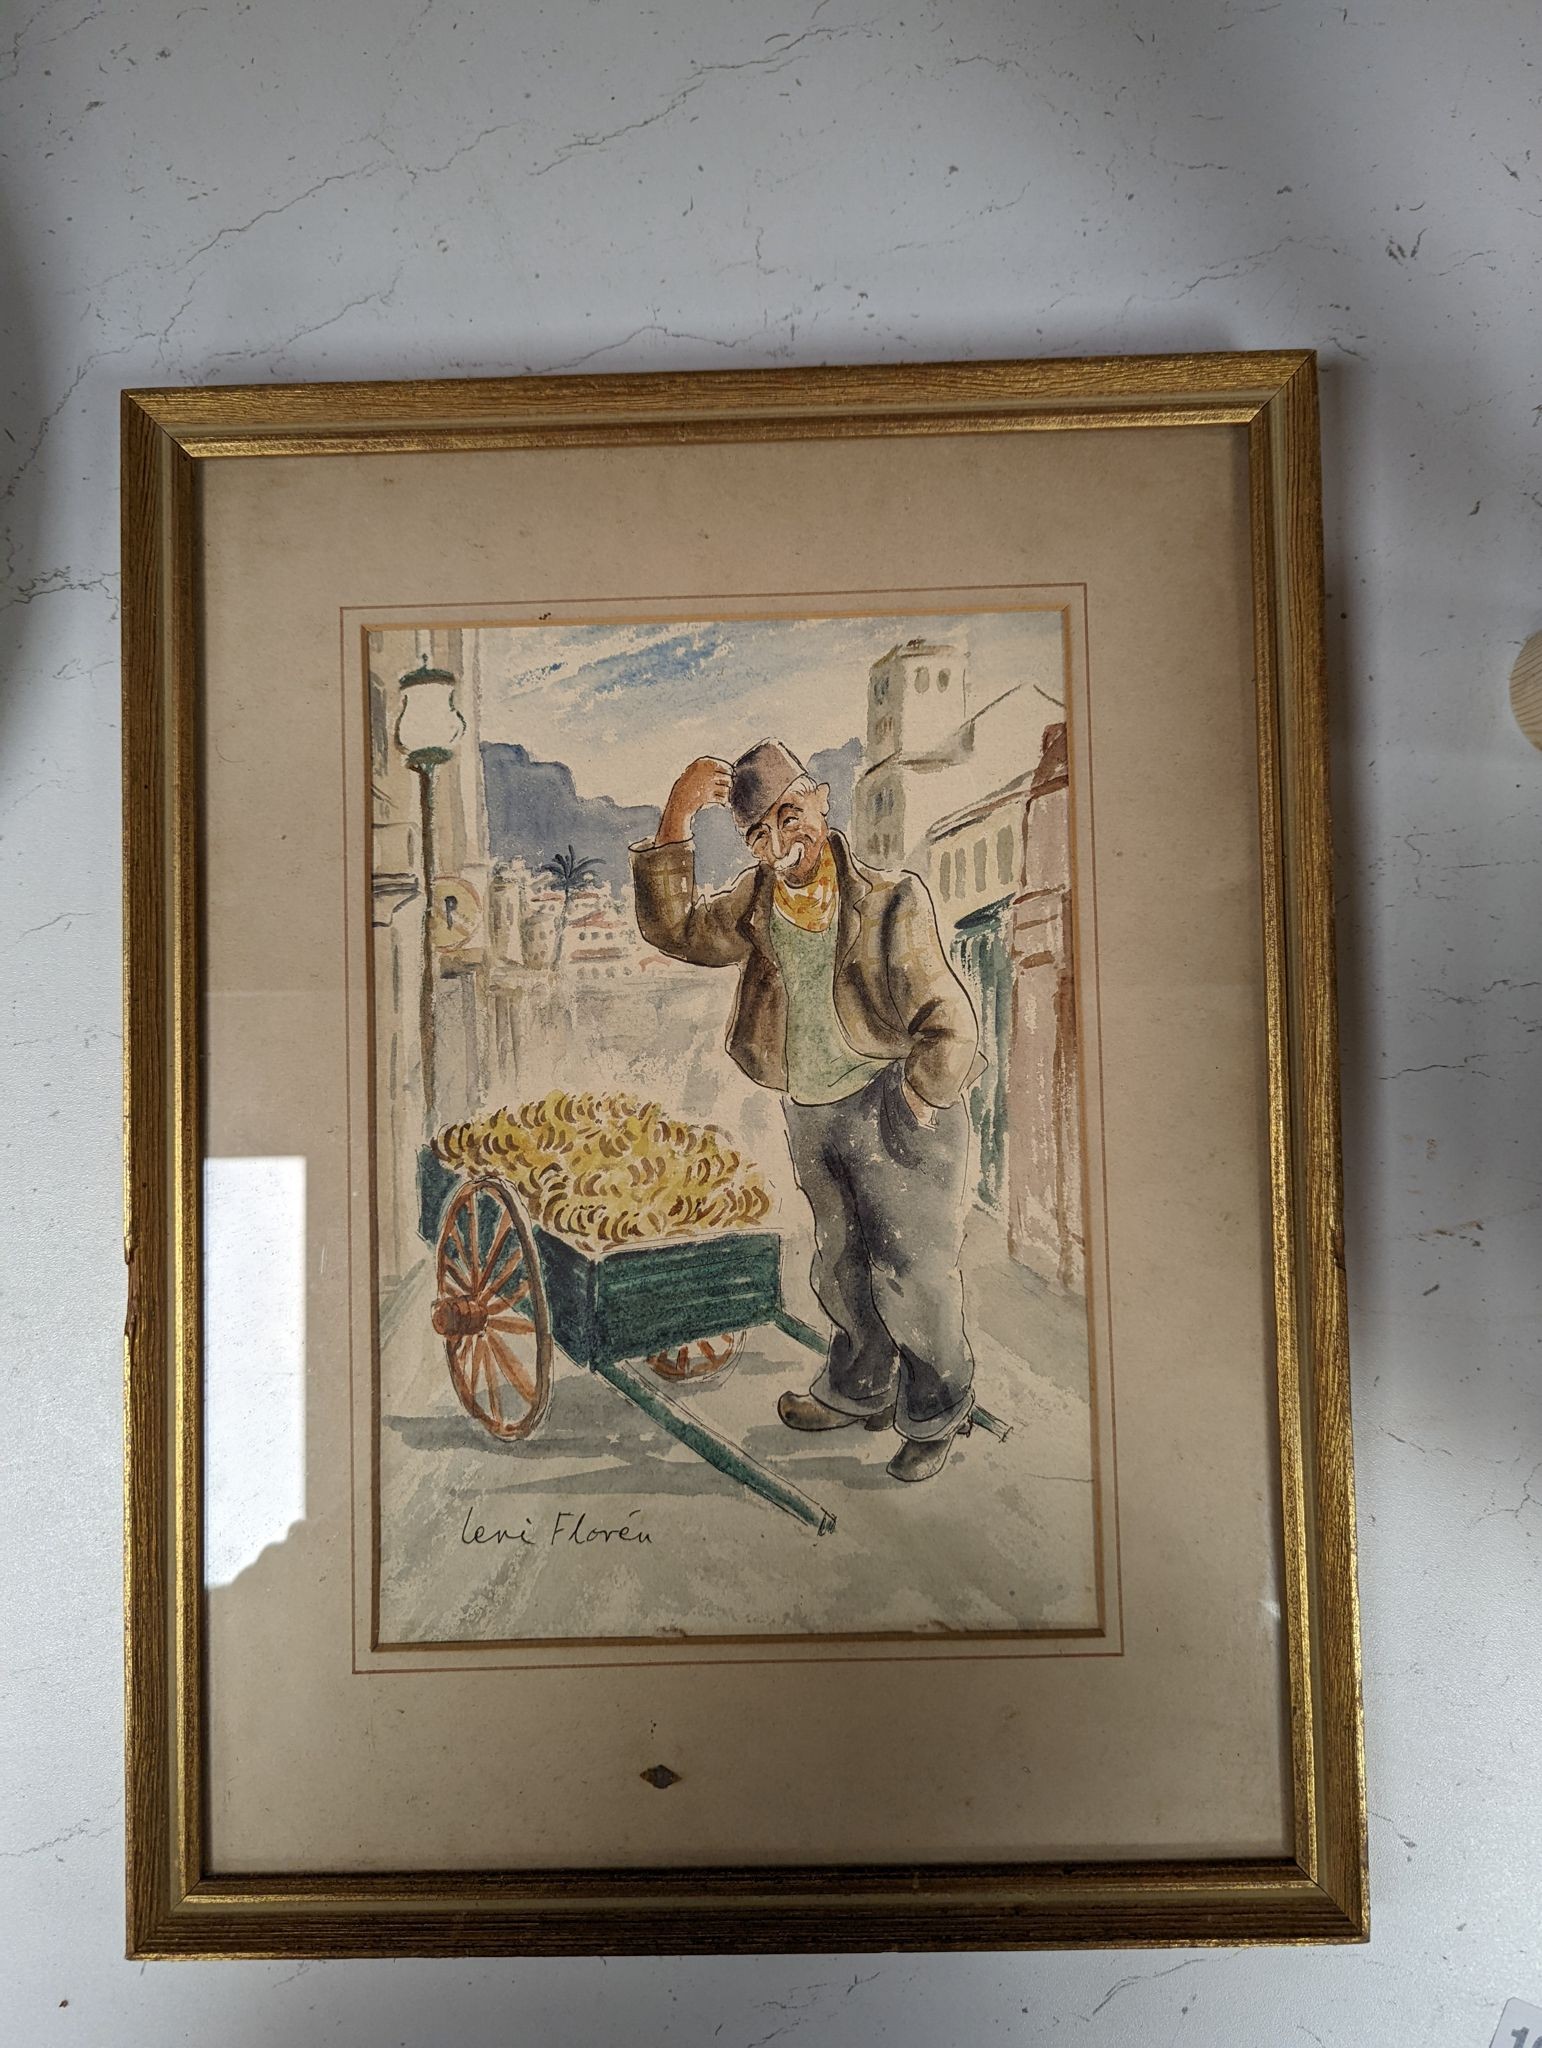 Levi Floren, ink and watercolour, Banana Seller, signed, 26 x 18cm